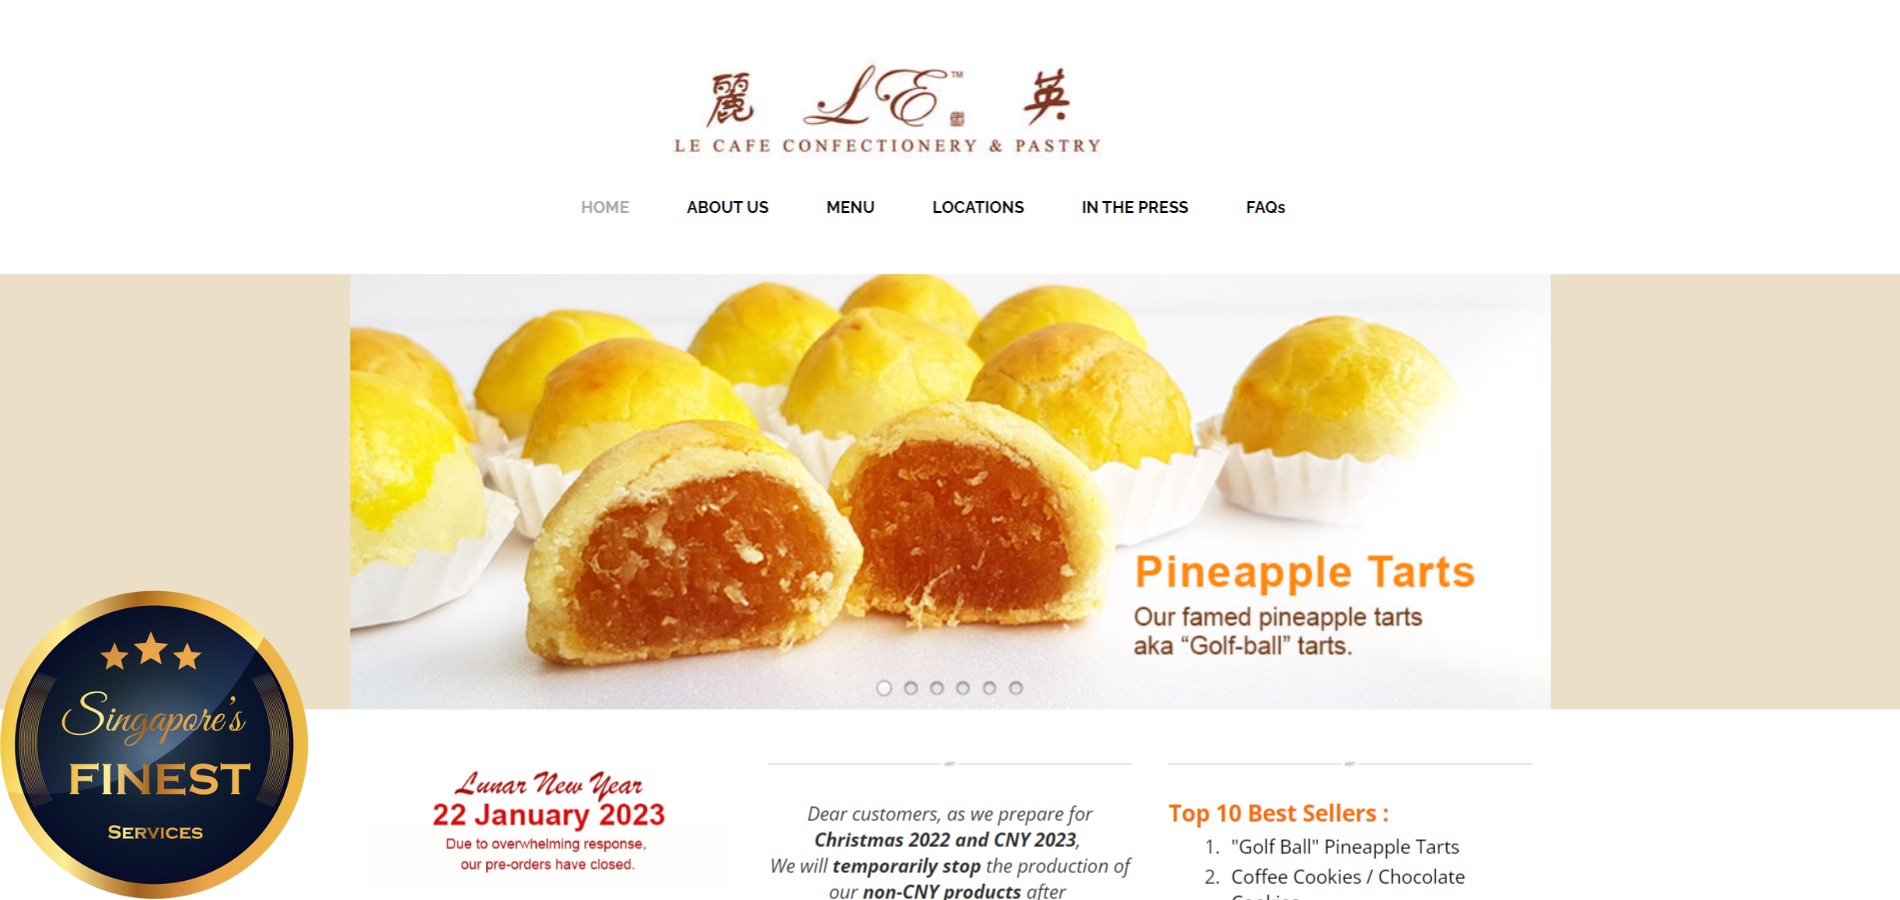 10 Best Pineapple Tarts To Try In Singapore